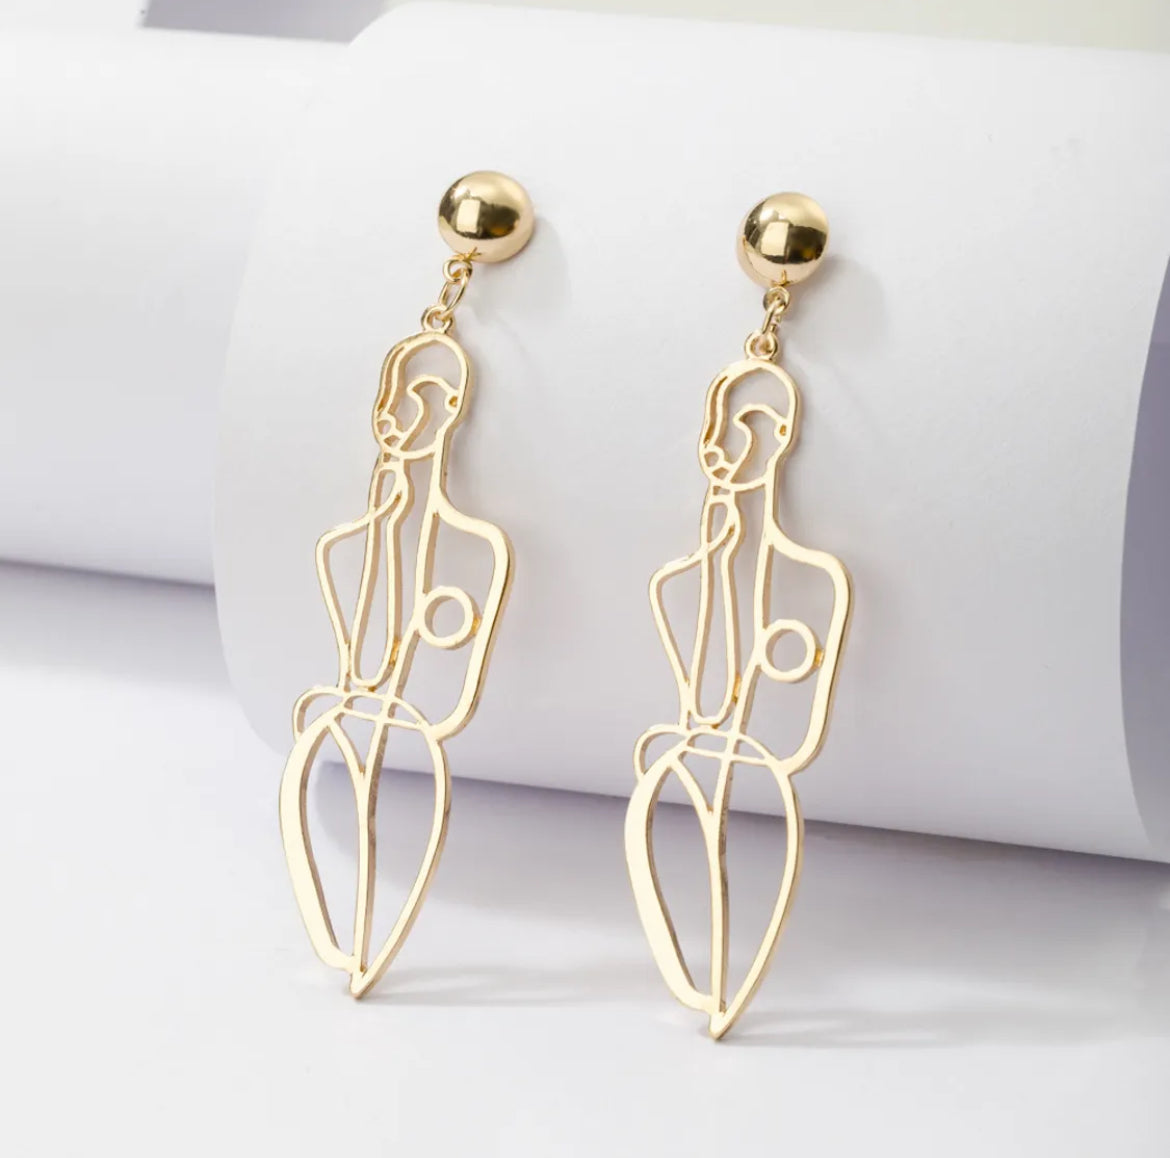 Our Form Earrings